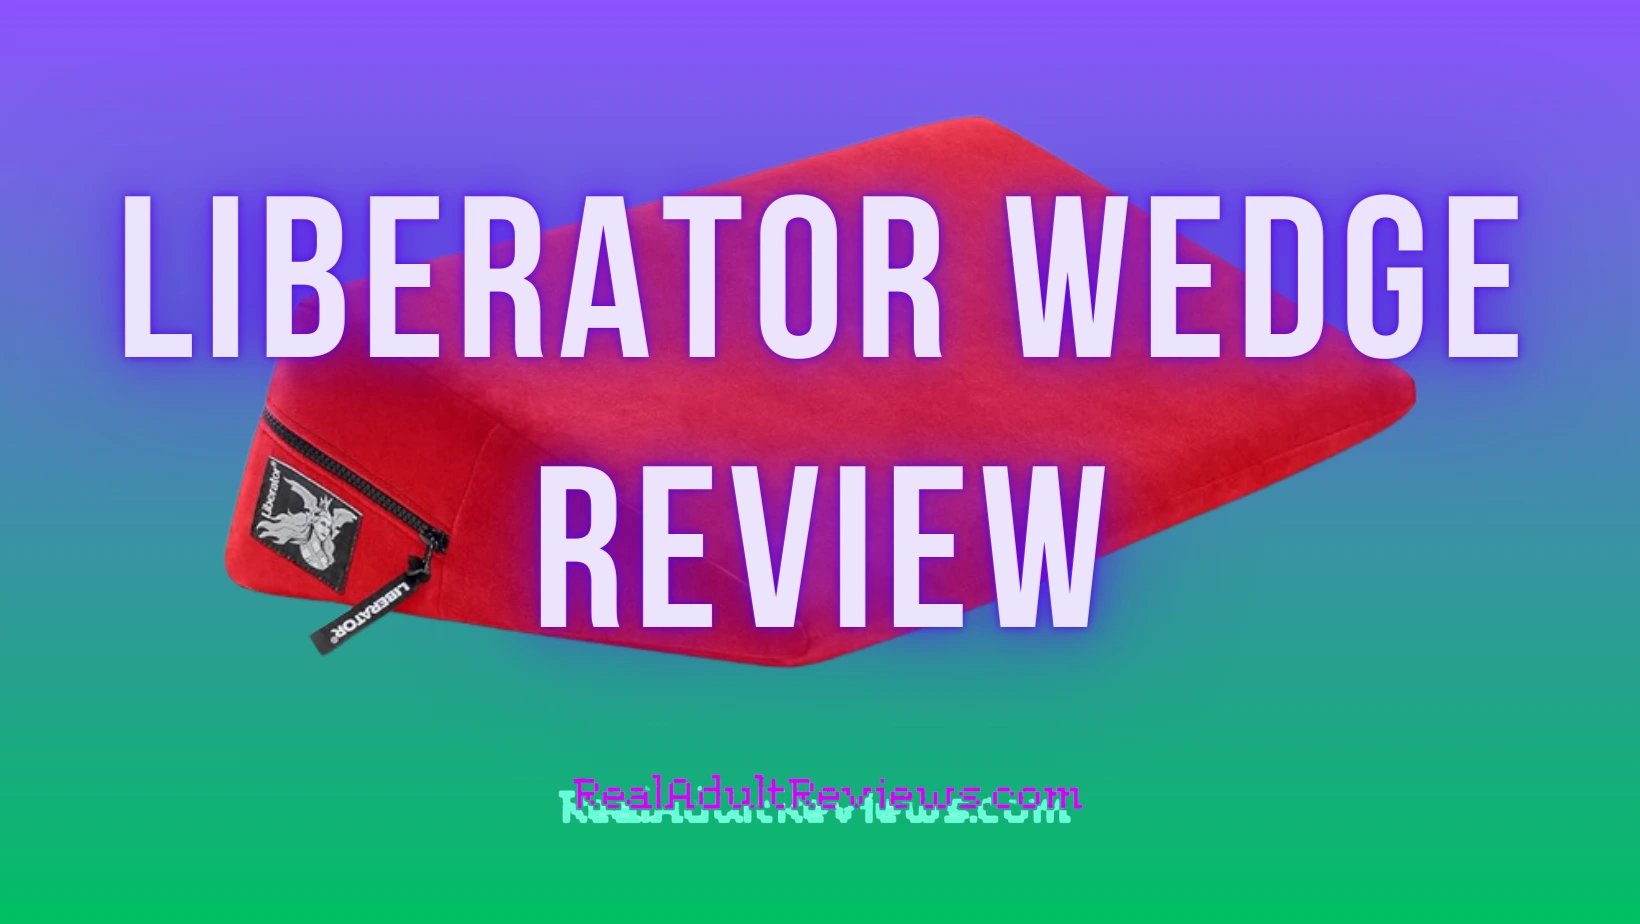 Liberator Wedge Review: Does a Sex Pillow Make Sex Easier?